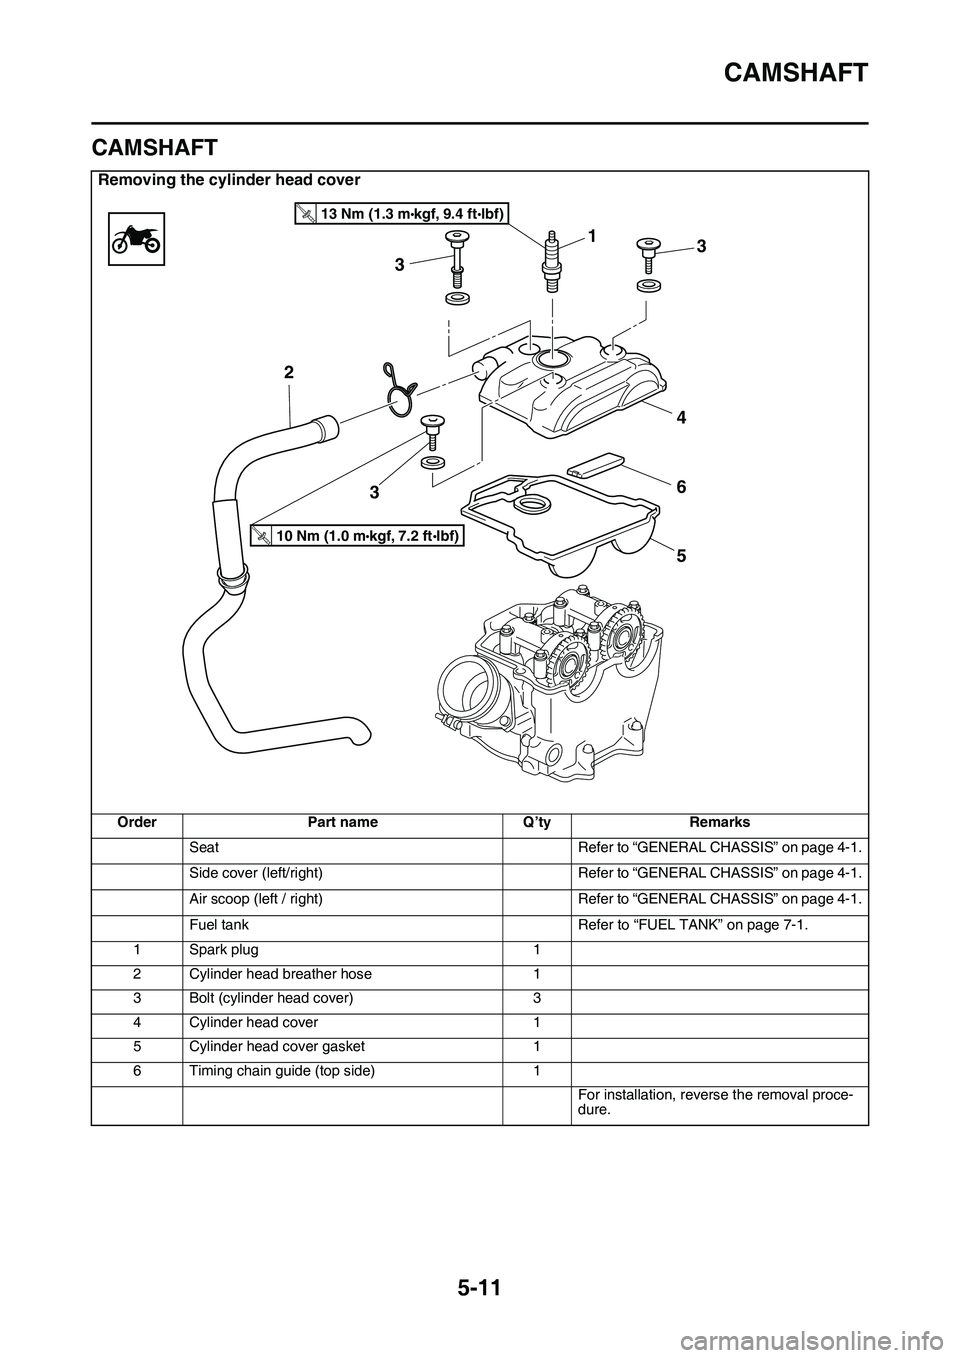 YAMAHA YZ450F 2014 Owners Guide CAMSHAFT
5-11
EAS1SL1207
CAMSHAFT
Removing the cylinder head cover
OrderPart nameQ’tyRemarks
SeatRefer to “GENERAL CHASSIS” on page 4-1.
Side cover (left/right)Refer to “GENERAL CHASSIS” on 